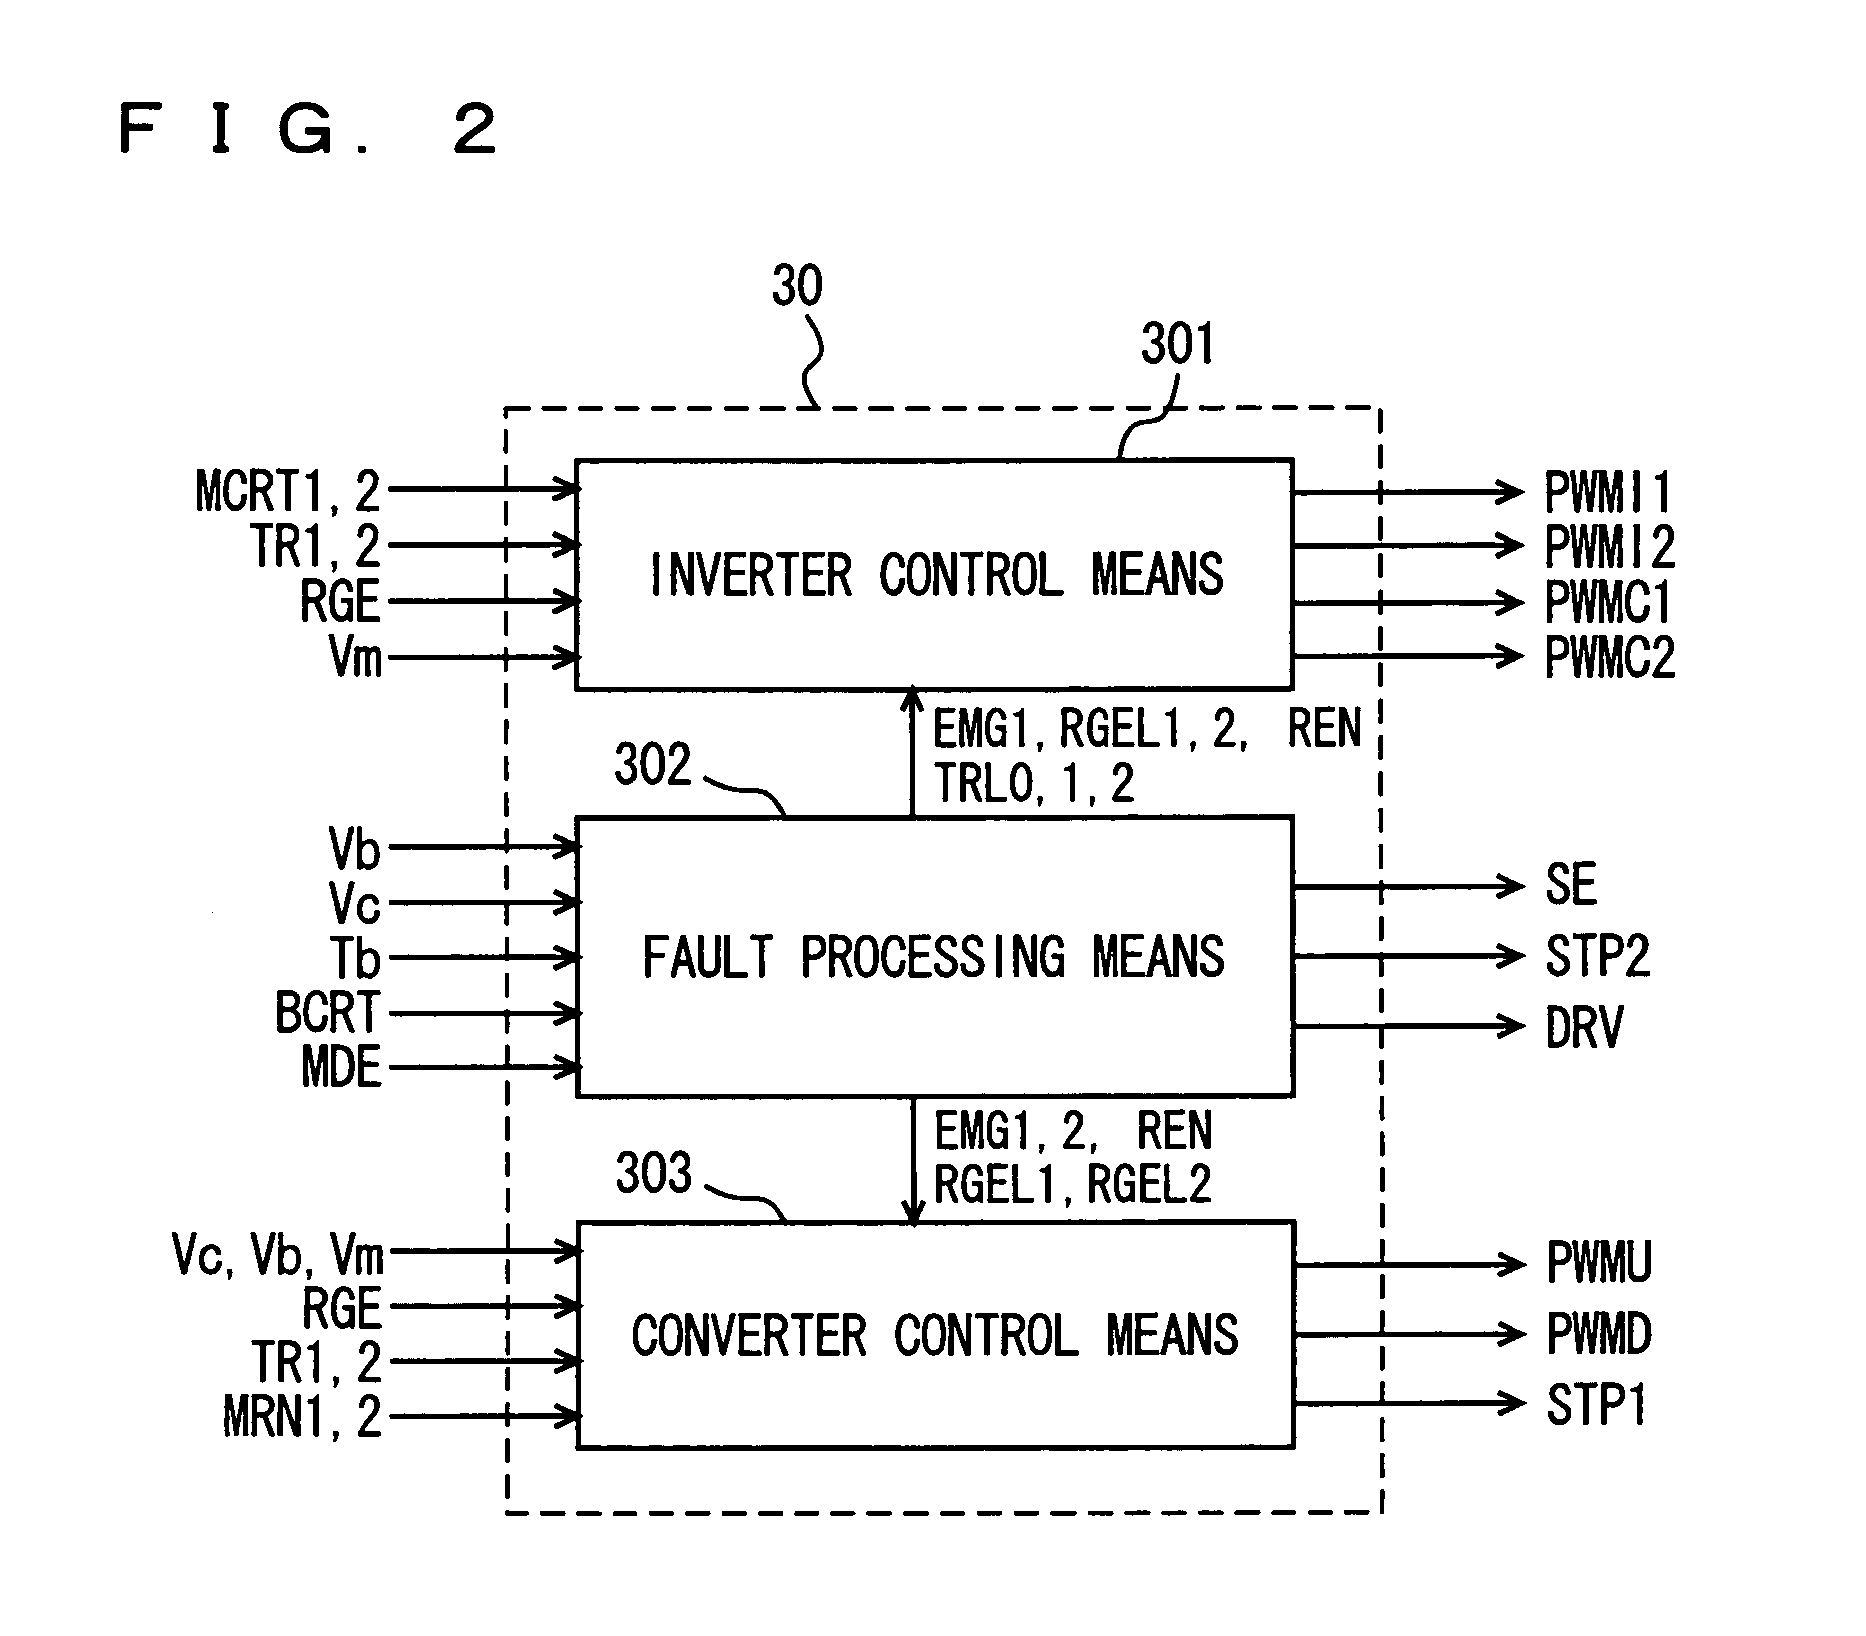 Motor drive apparatus, hybrid vehicle drive apparatus using the same, and computer readable recording medium recorded with program for causing computer to perform control of motor drive apparatus